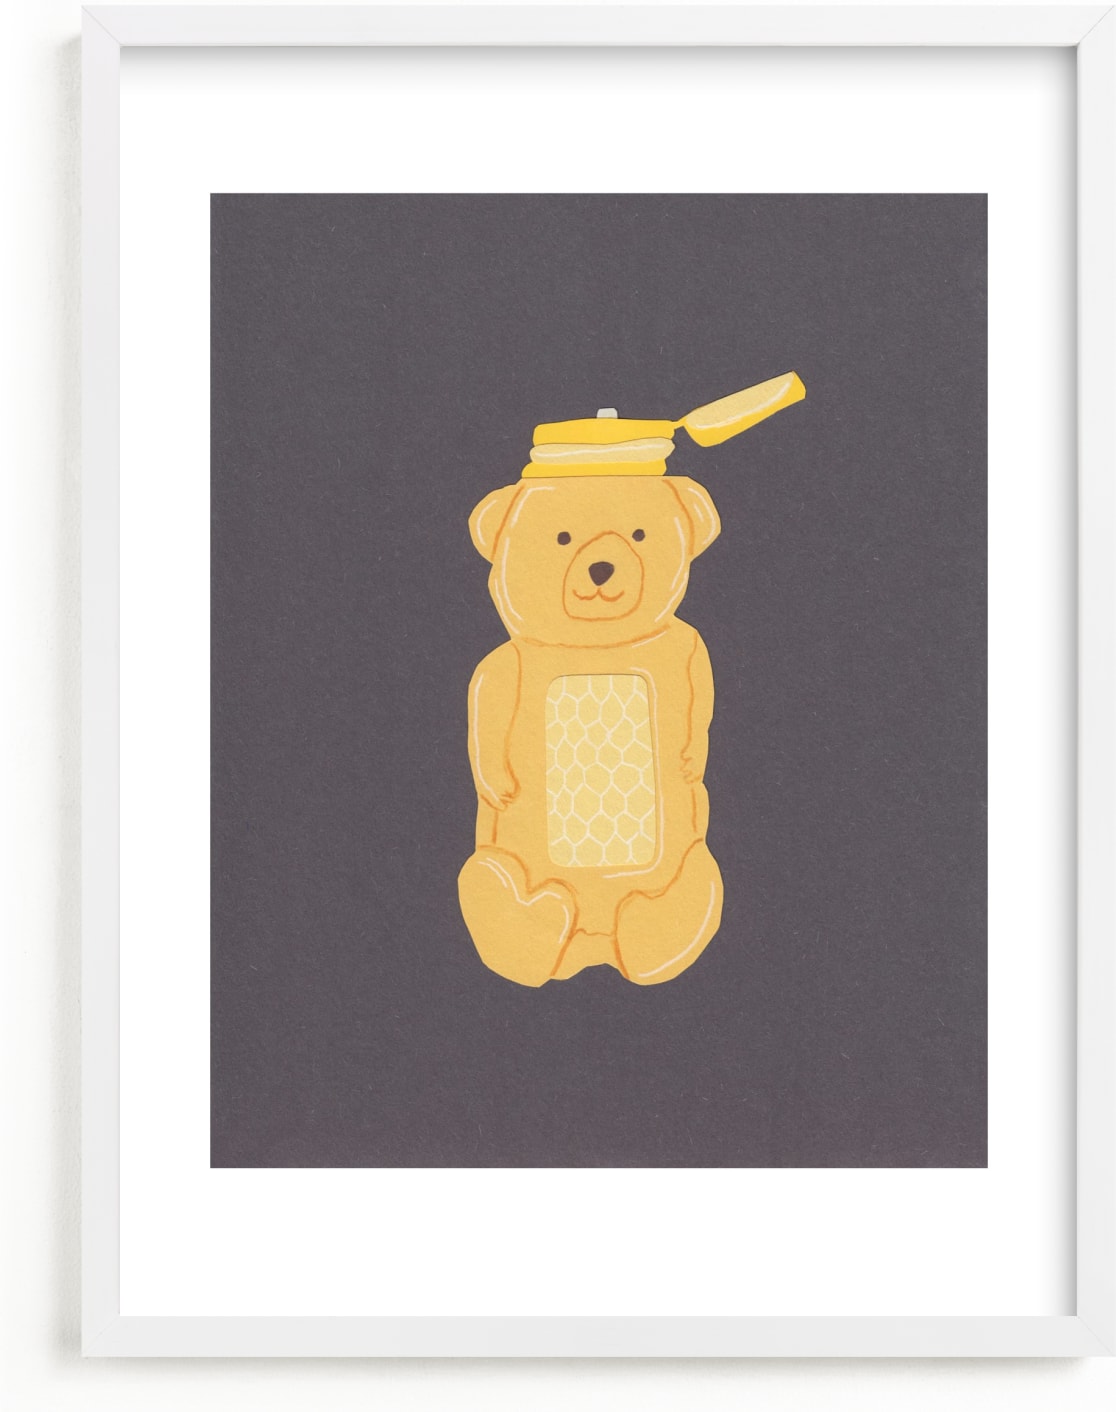 This is a yellow kids wall art by Elliot Stokes called Honey Bear.